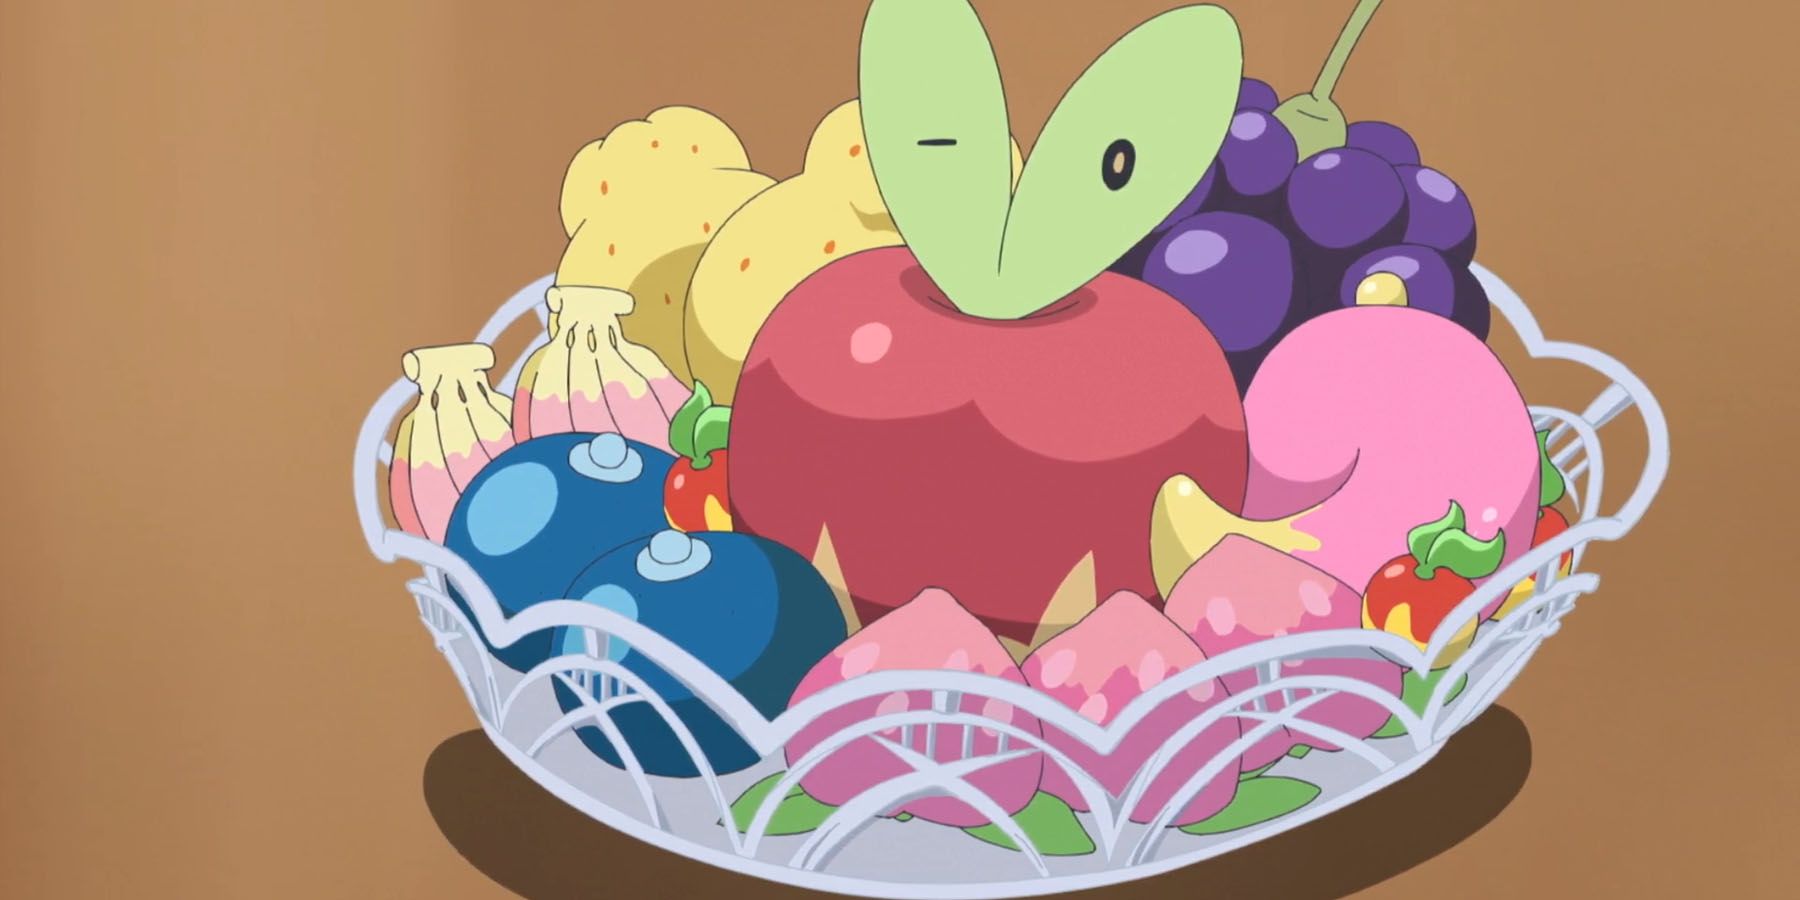 A screenshot of Applin hiding in a bowl of fruit in the Pokemon anime.